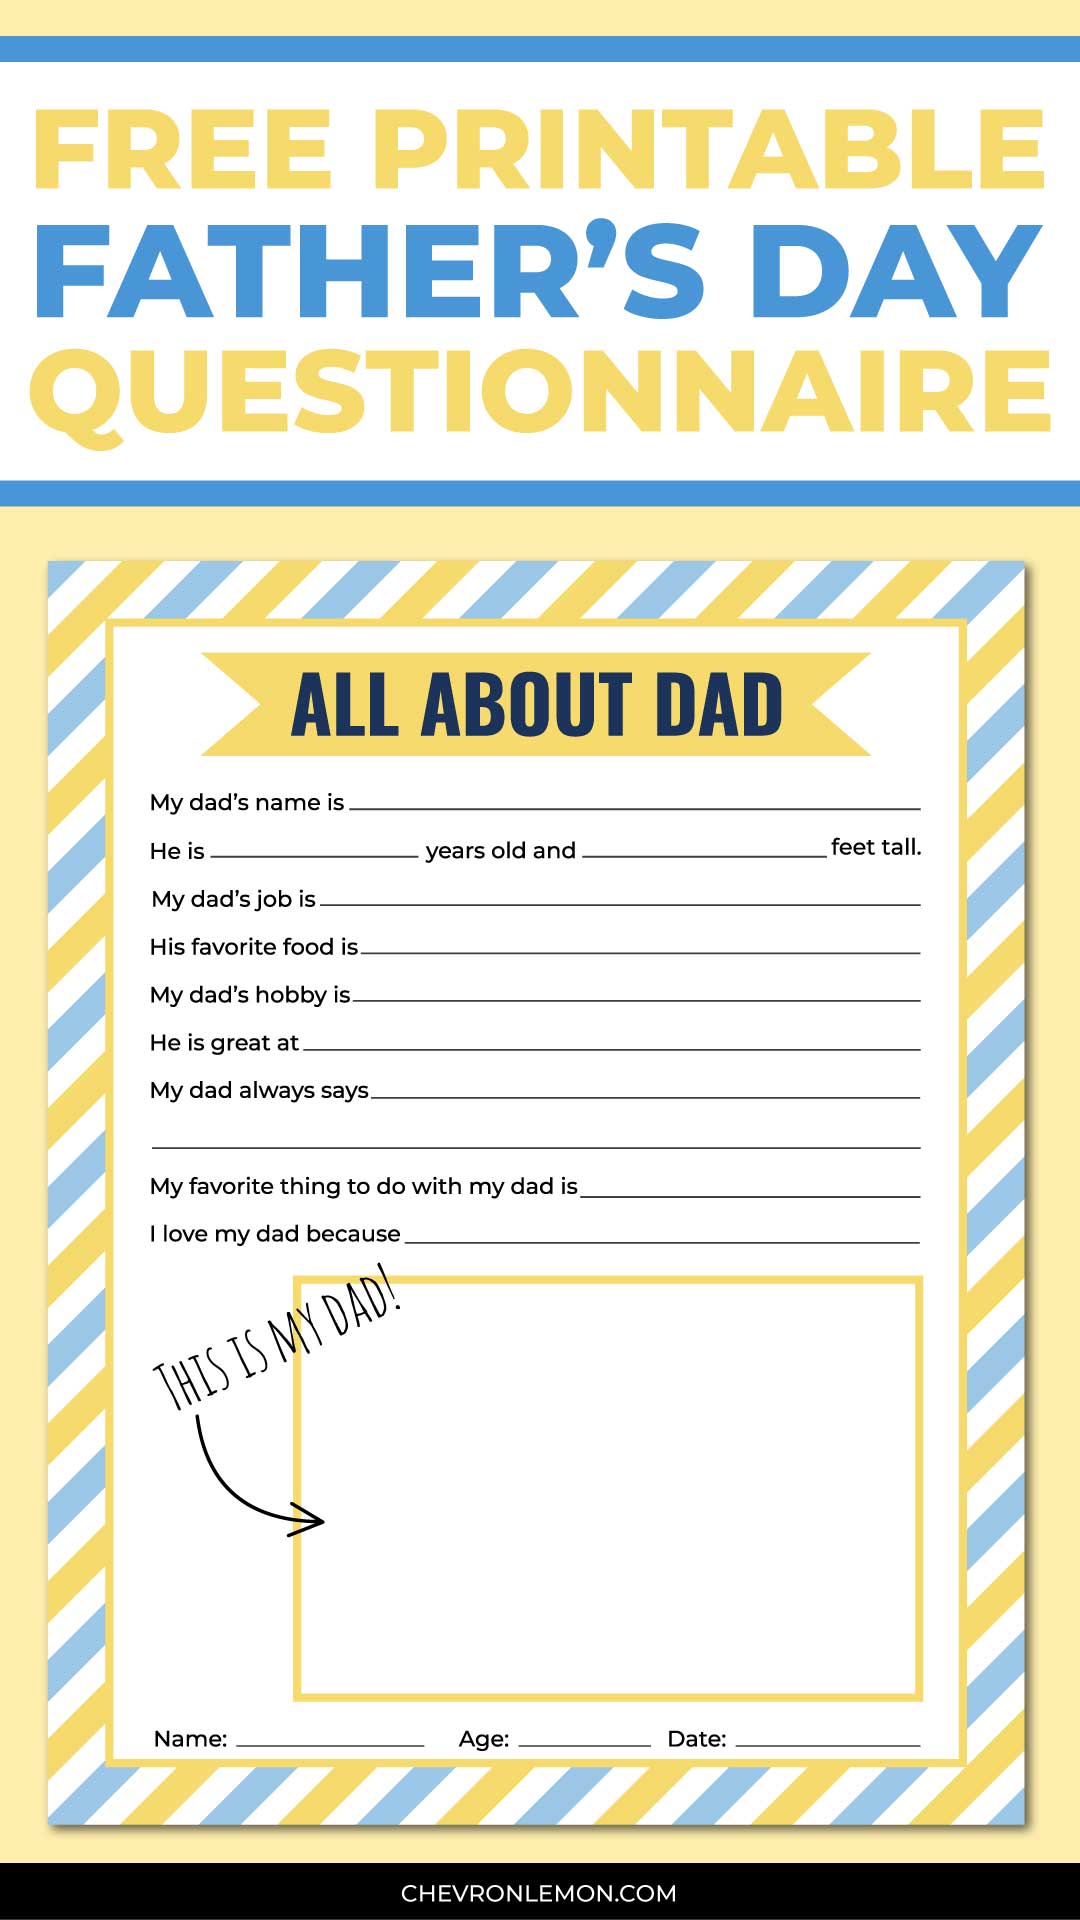 Printable father's day interview